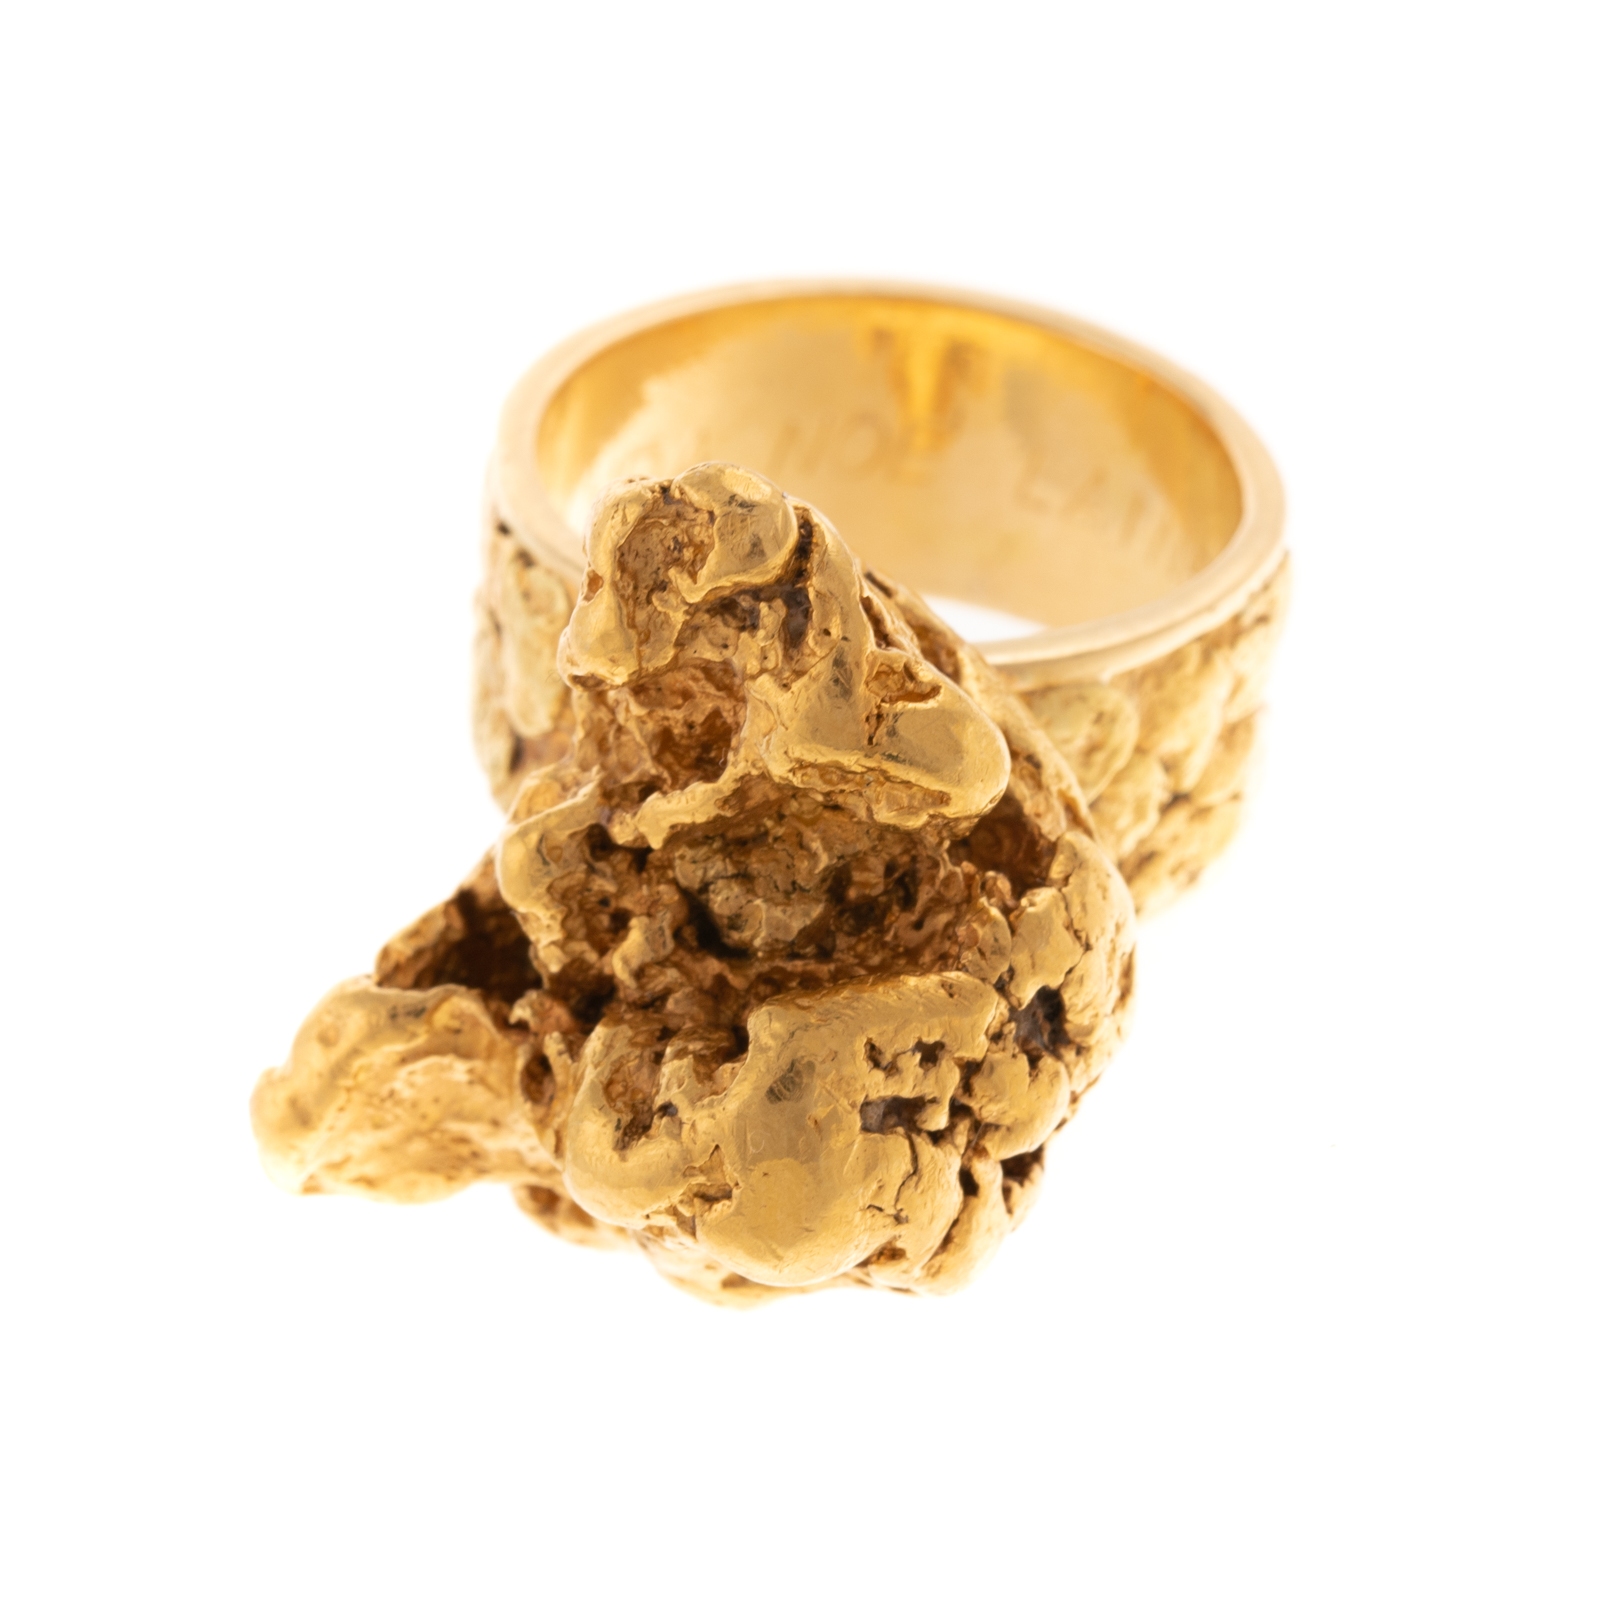 A SOLID 22K YELLOW GOLD NUGGET RING